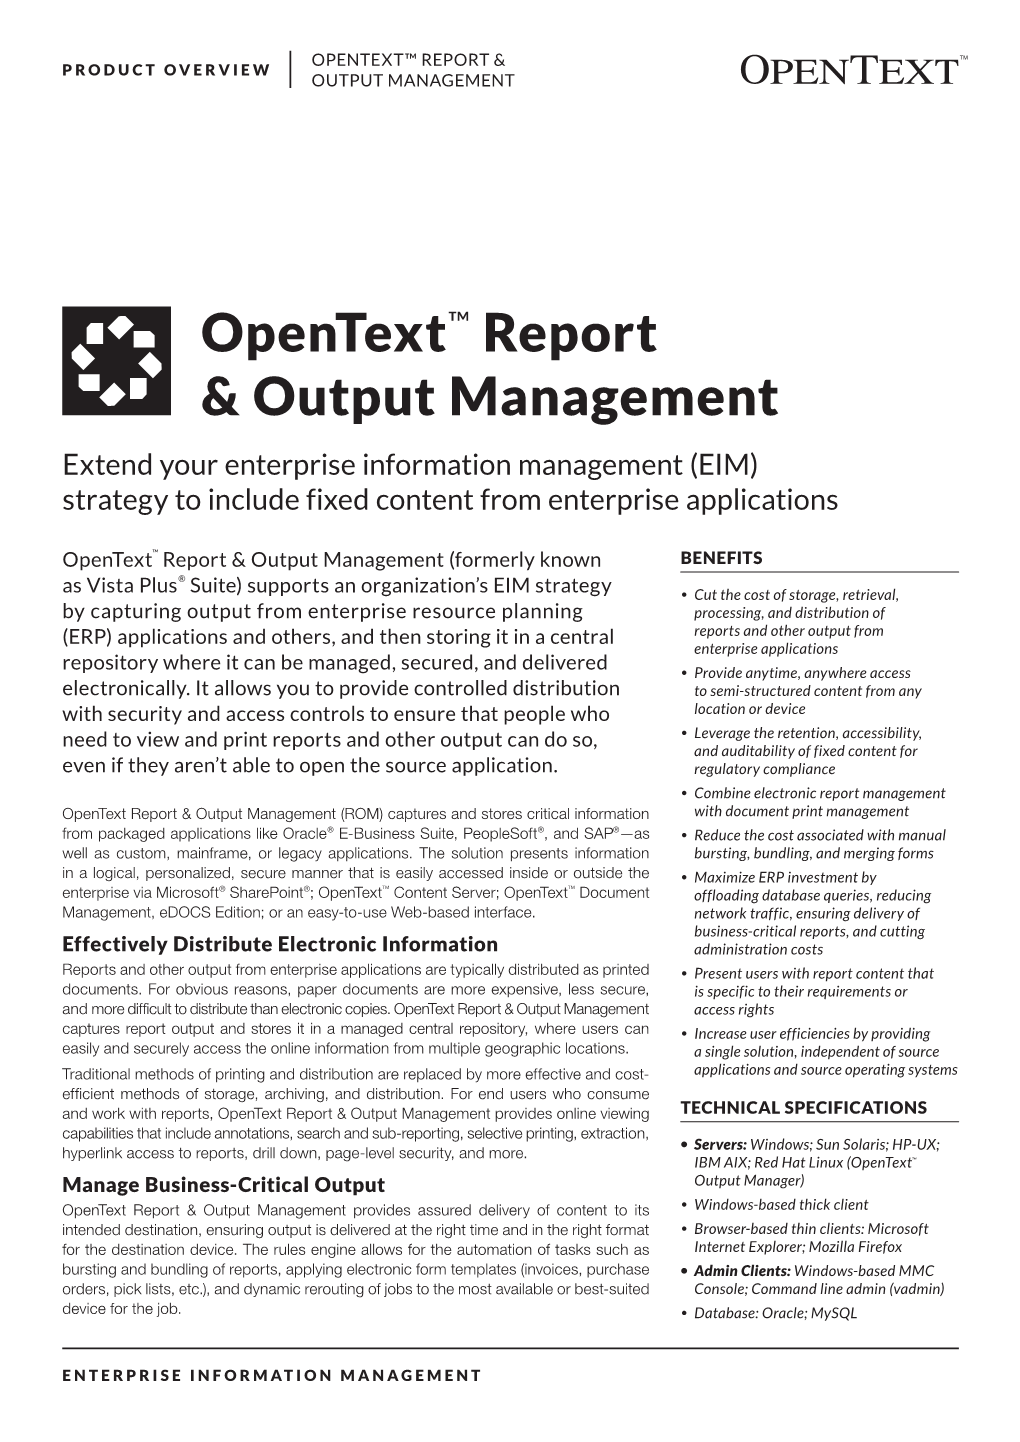 Opentext™ Report & Output Management Product Overview